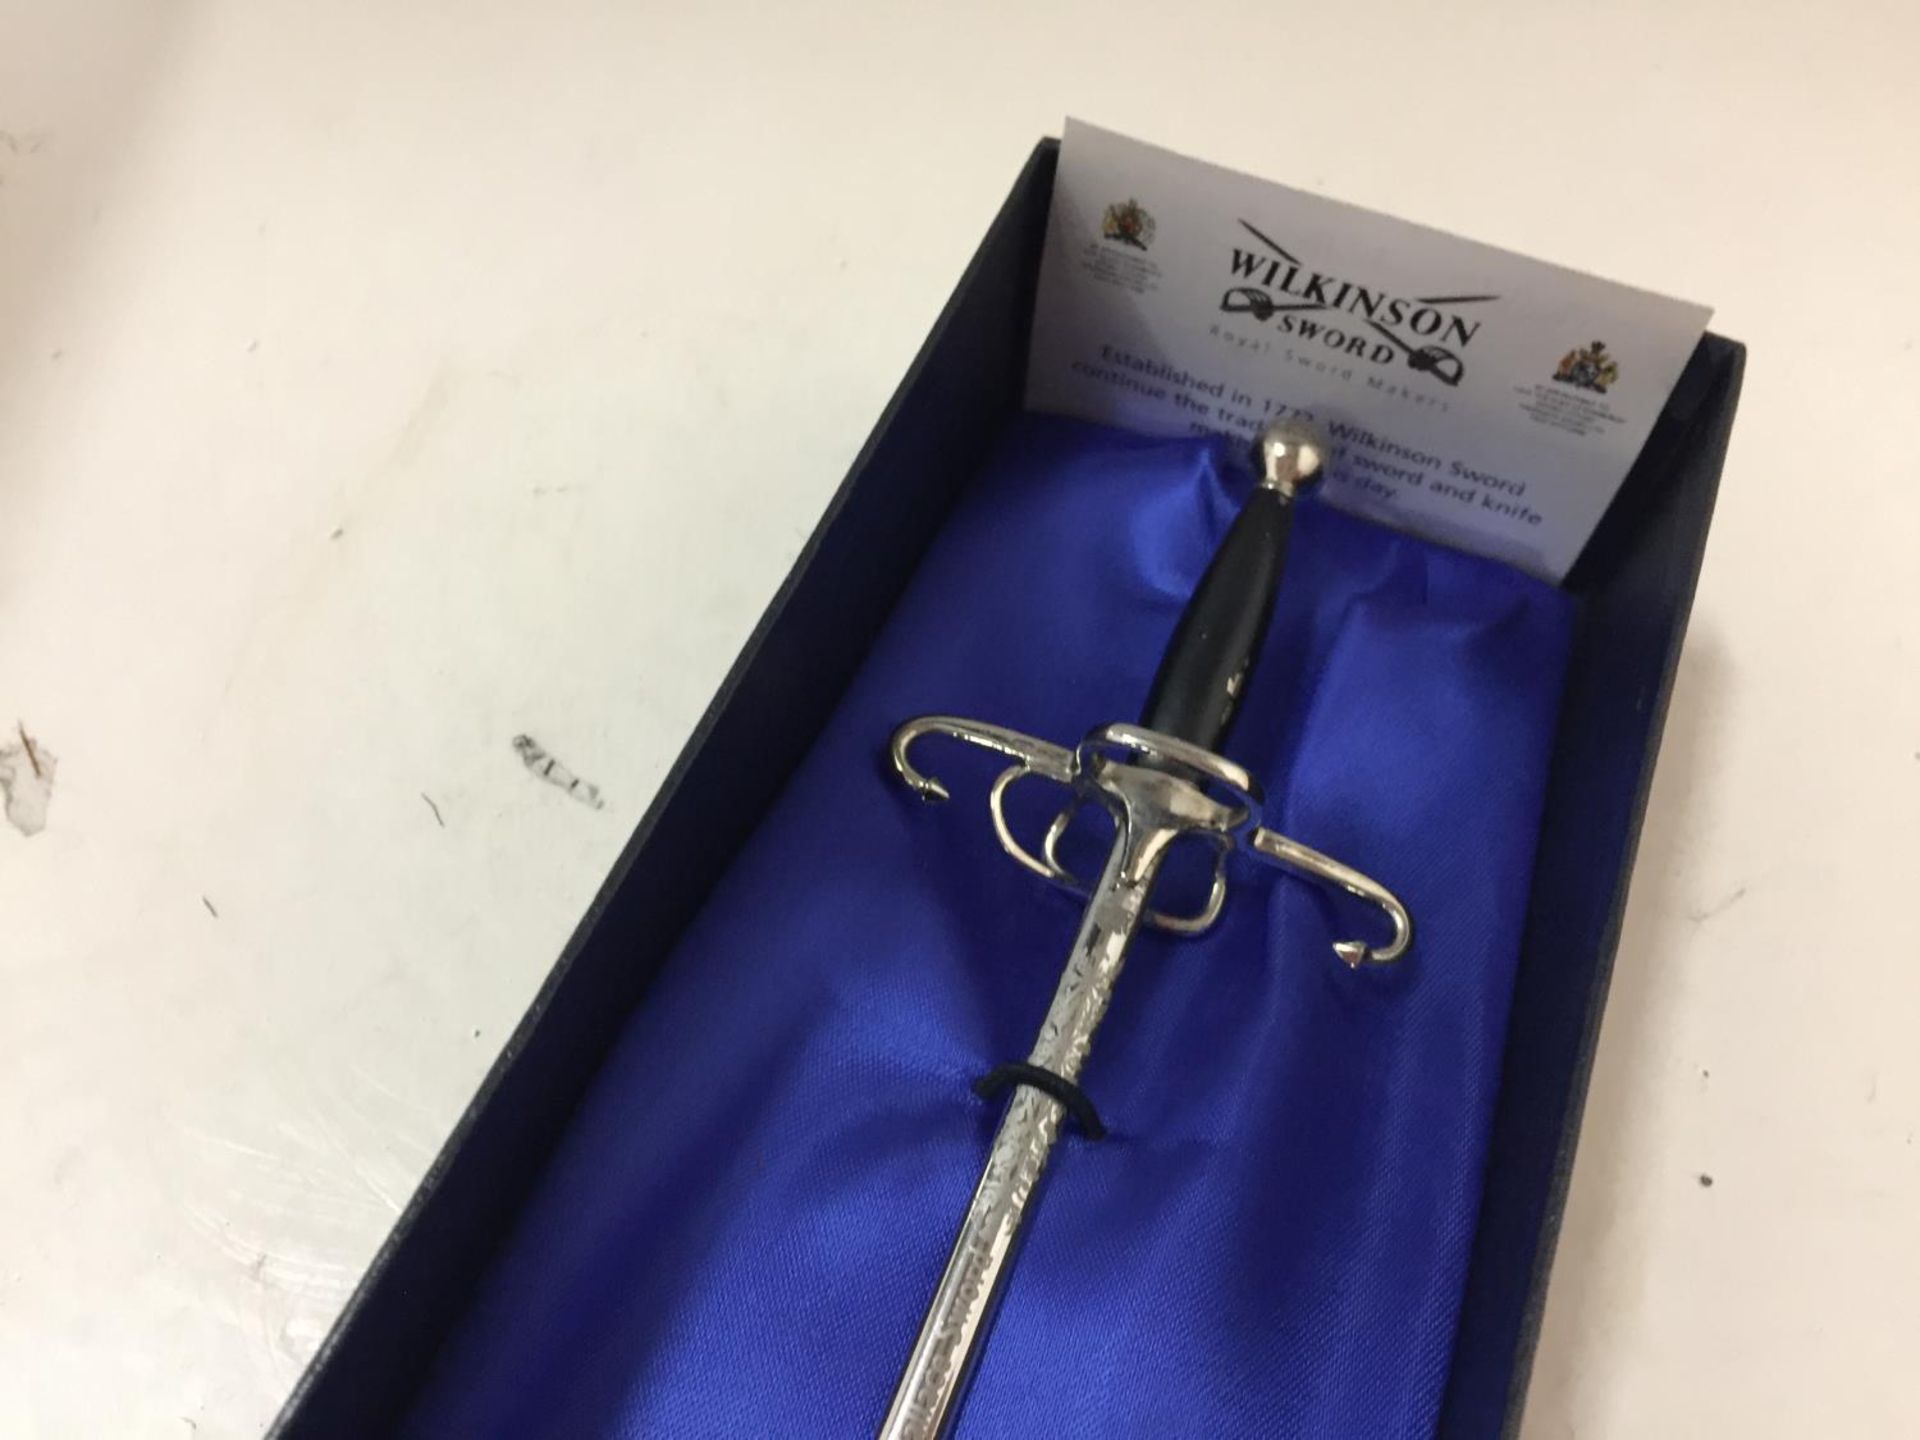 A BOXED REPLICA OF THE SIR WILLIAM WALLACE SWORD BY WILKINSON SWORD - Image 2 of 3